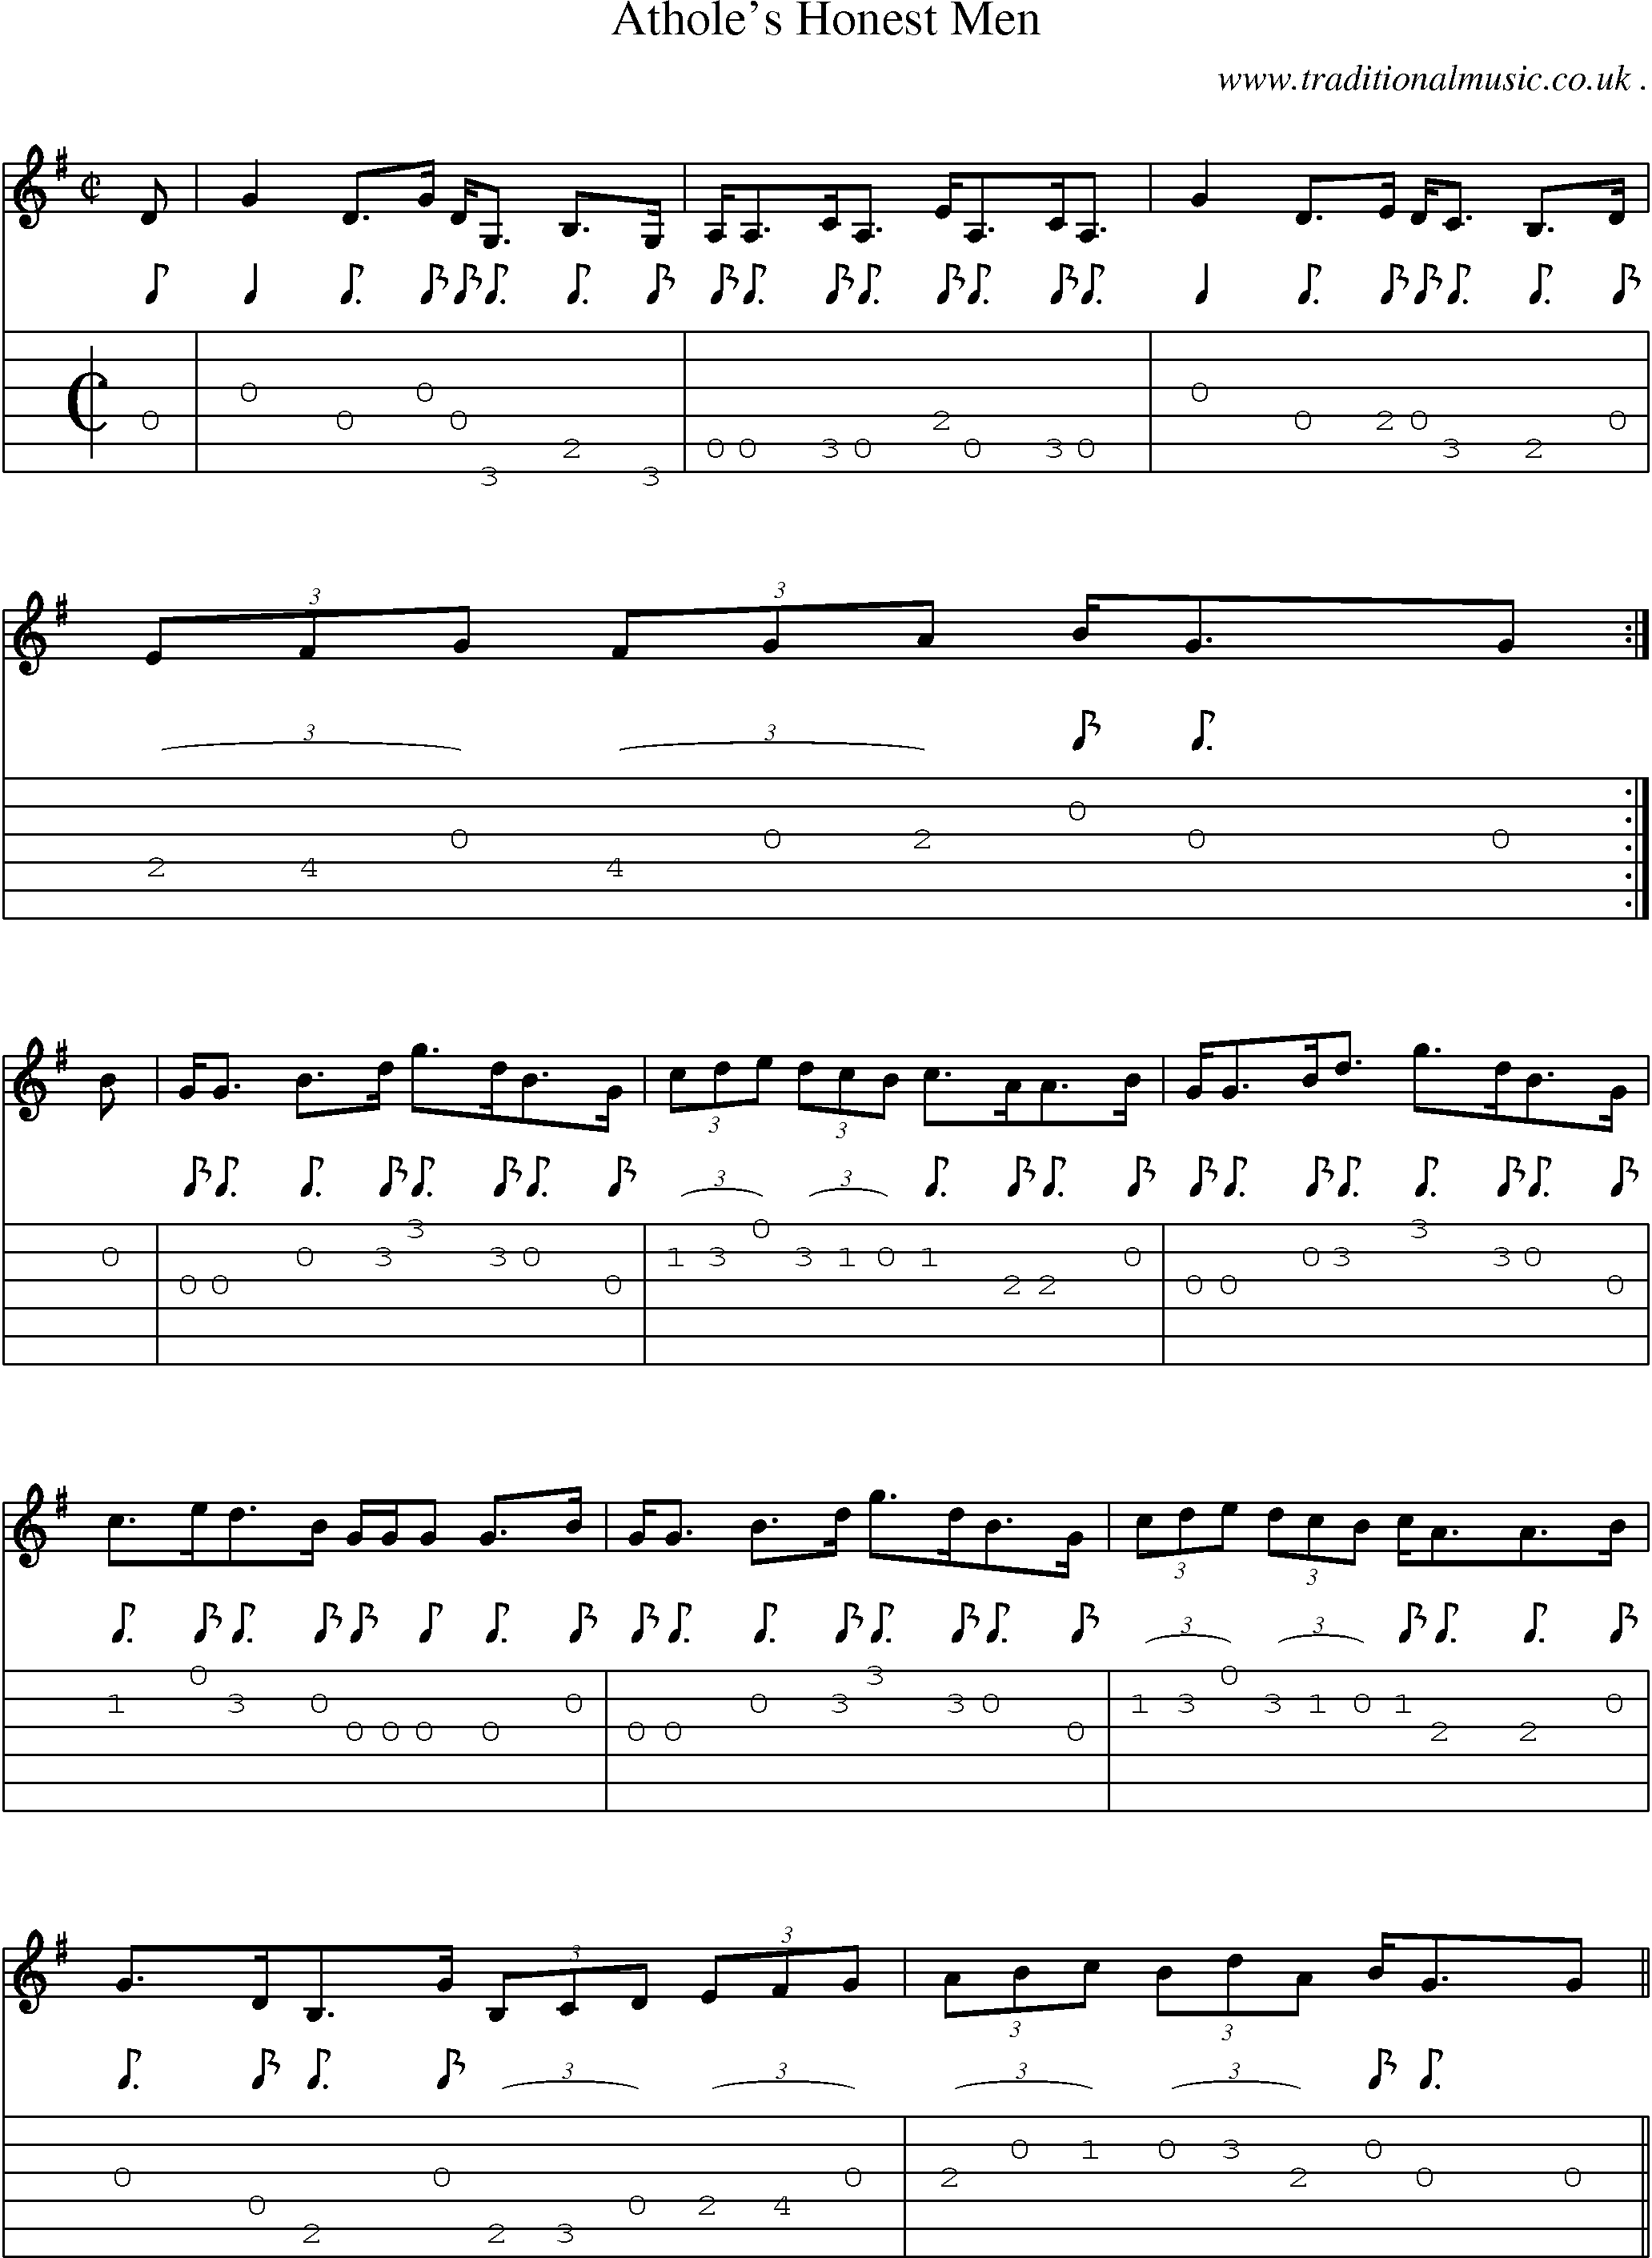 Sheet-music  score, Chords and Guitar Tabs for Atholes Honest Men